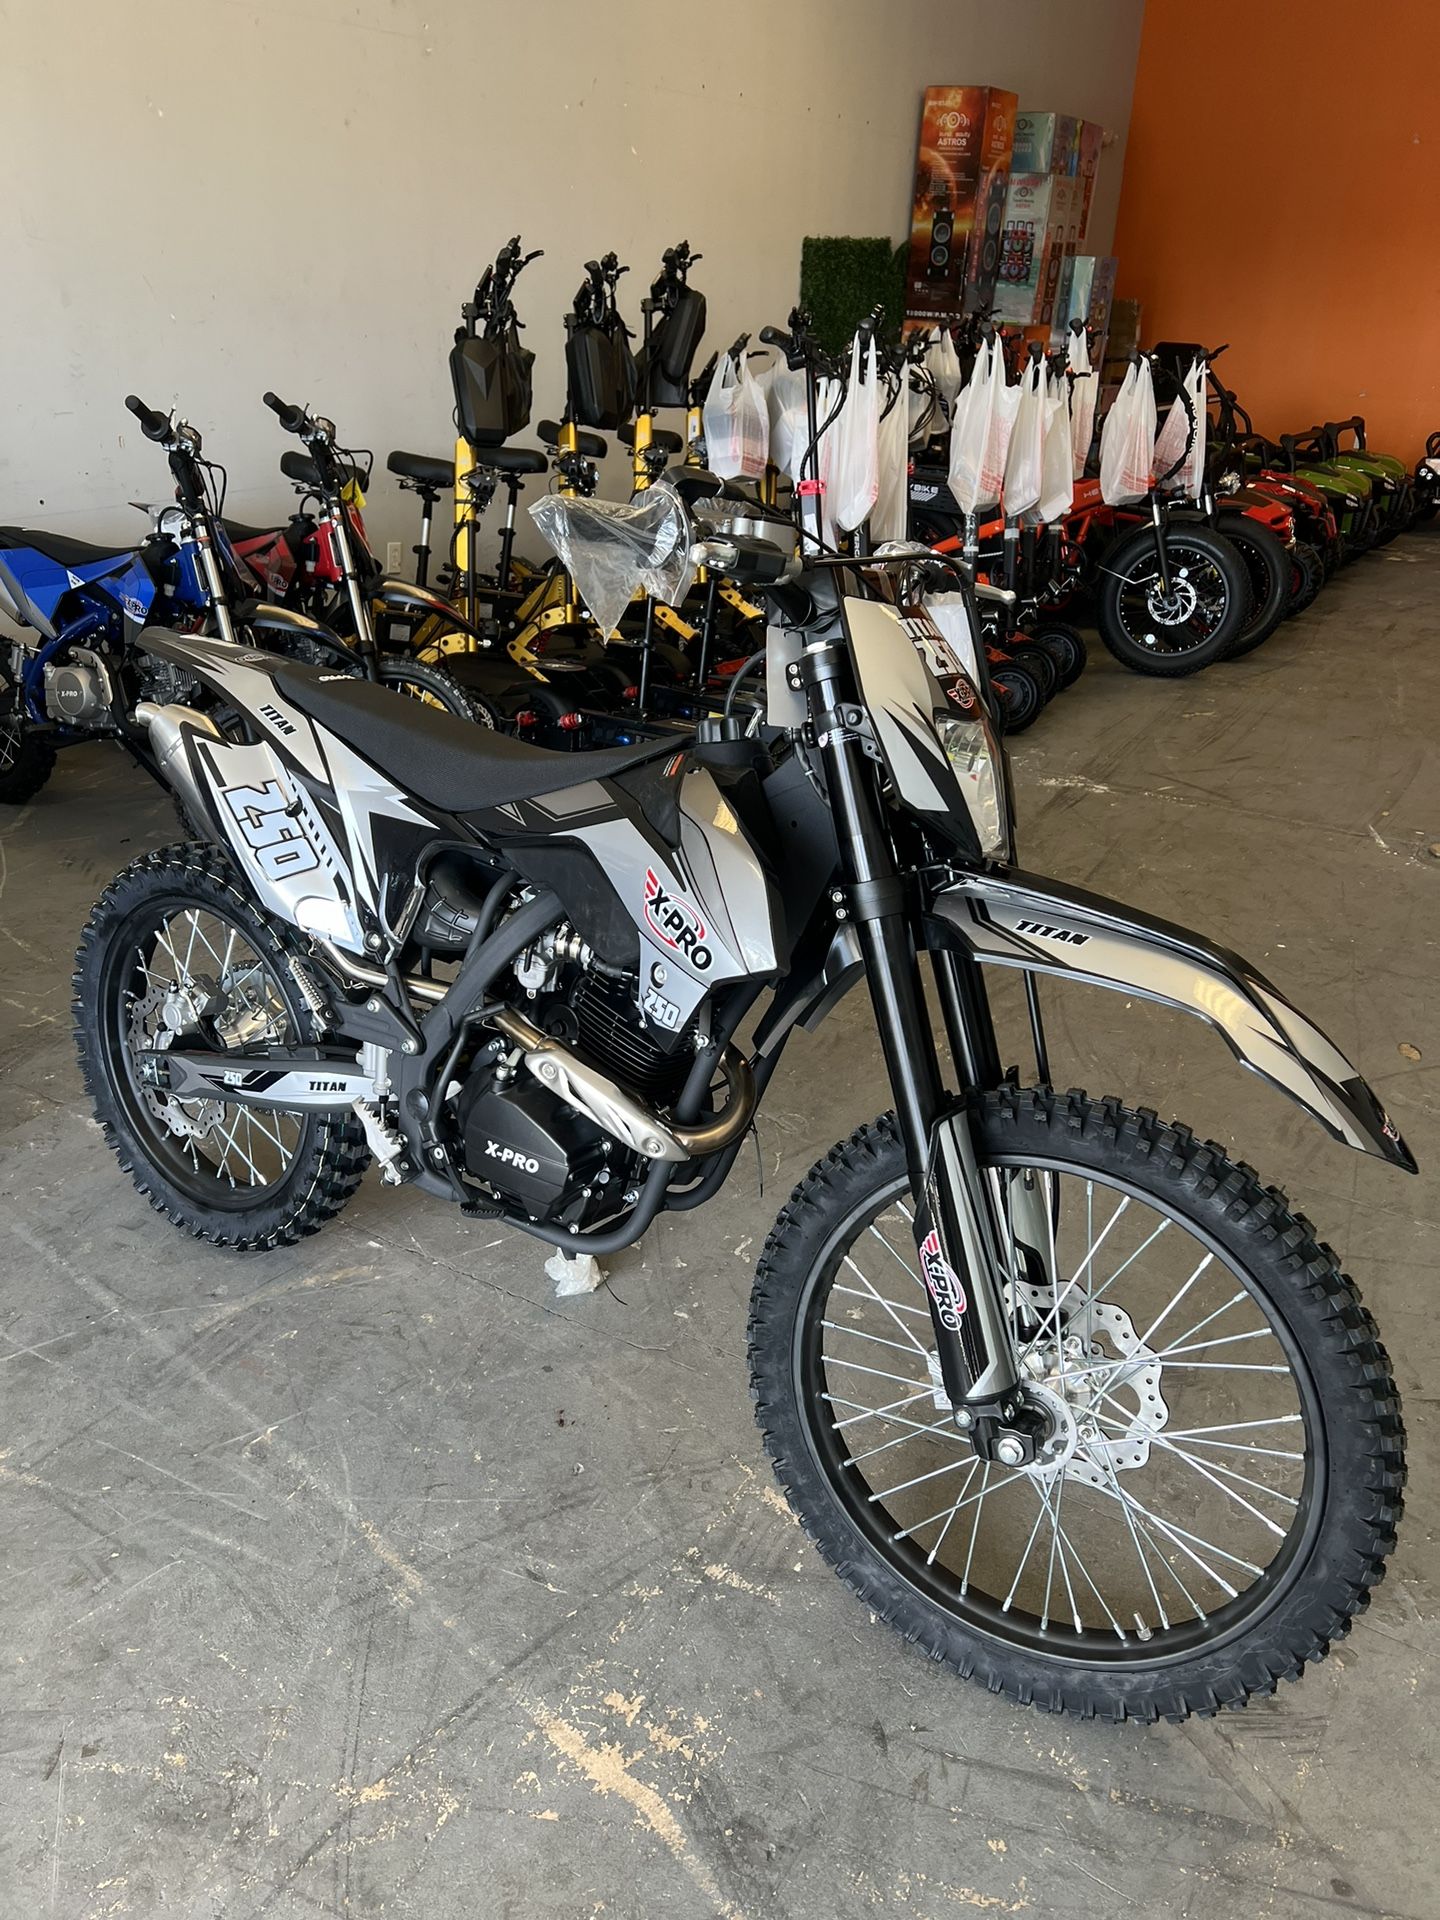 X Pro 250CC Dirt Bike! Finance For $50 Down Payment!!